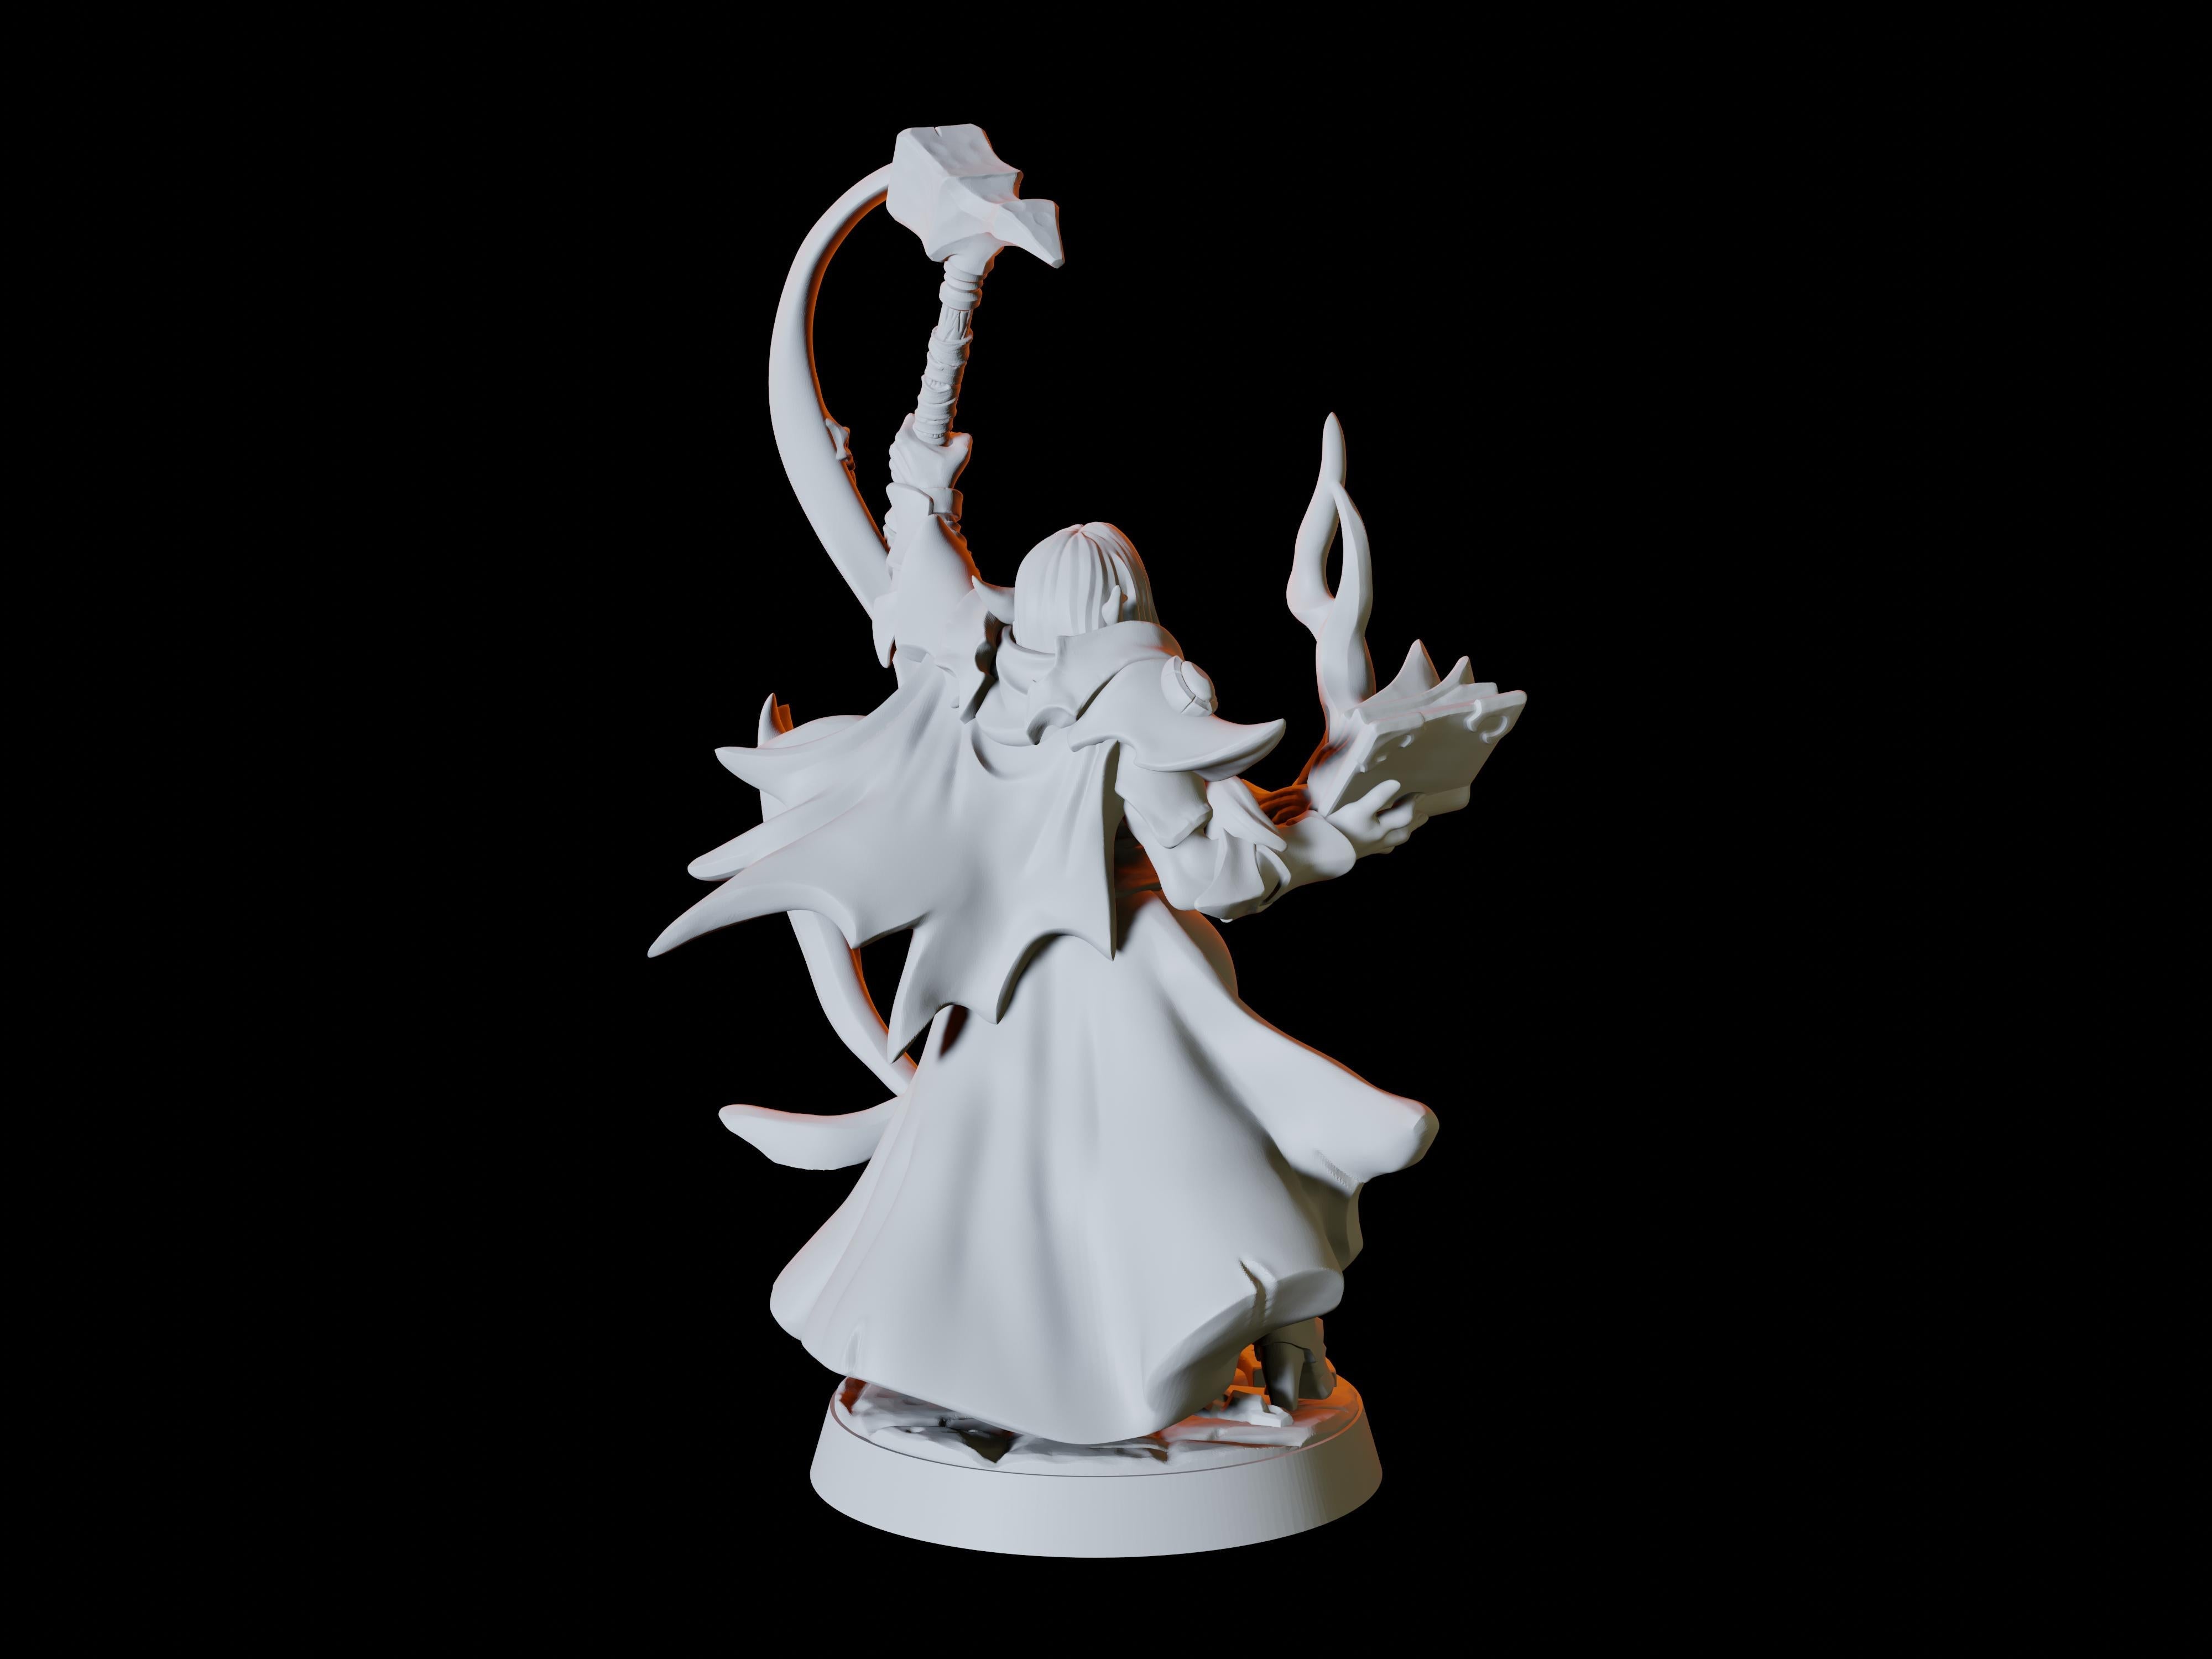 Drow or Dark Elf Miniature for Dungeons and Dragons - Myth Forged